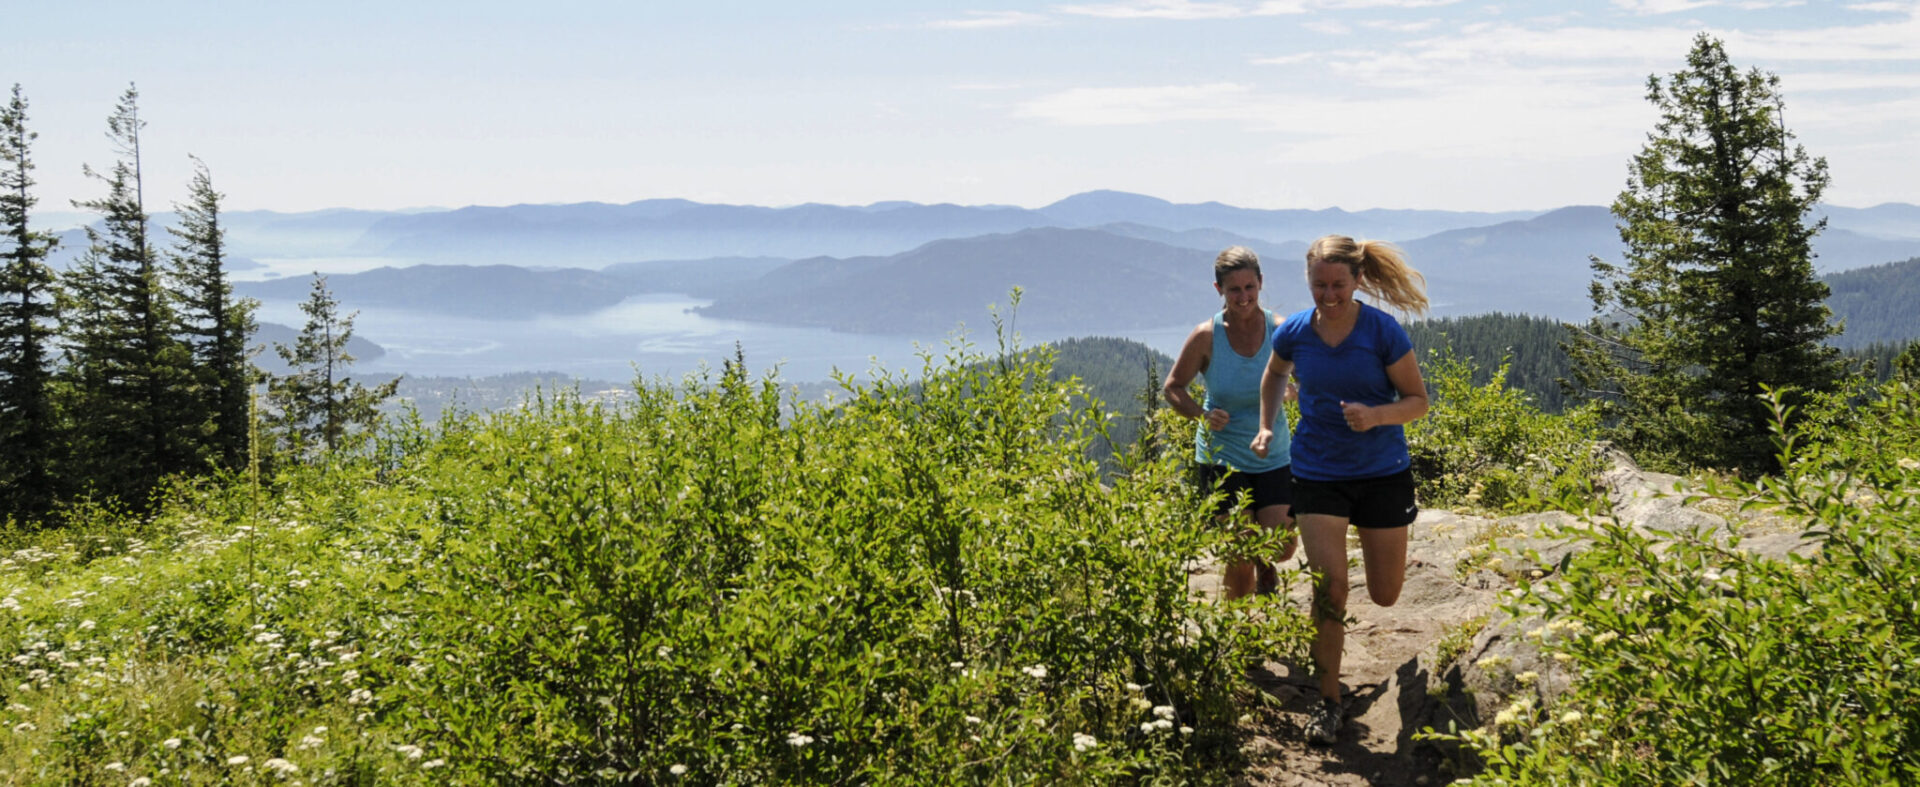 Two runners racing along a dirt trail on Schweitzer Mountain with a view of Lake Pend Oreille in the far distance.